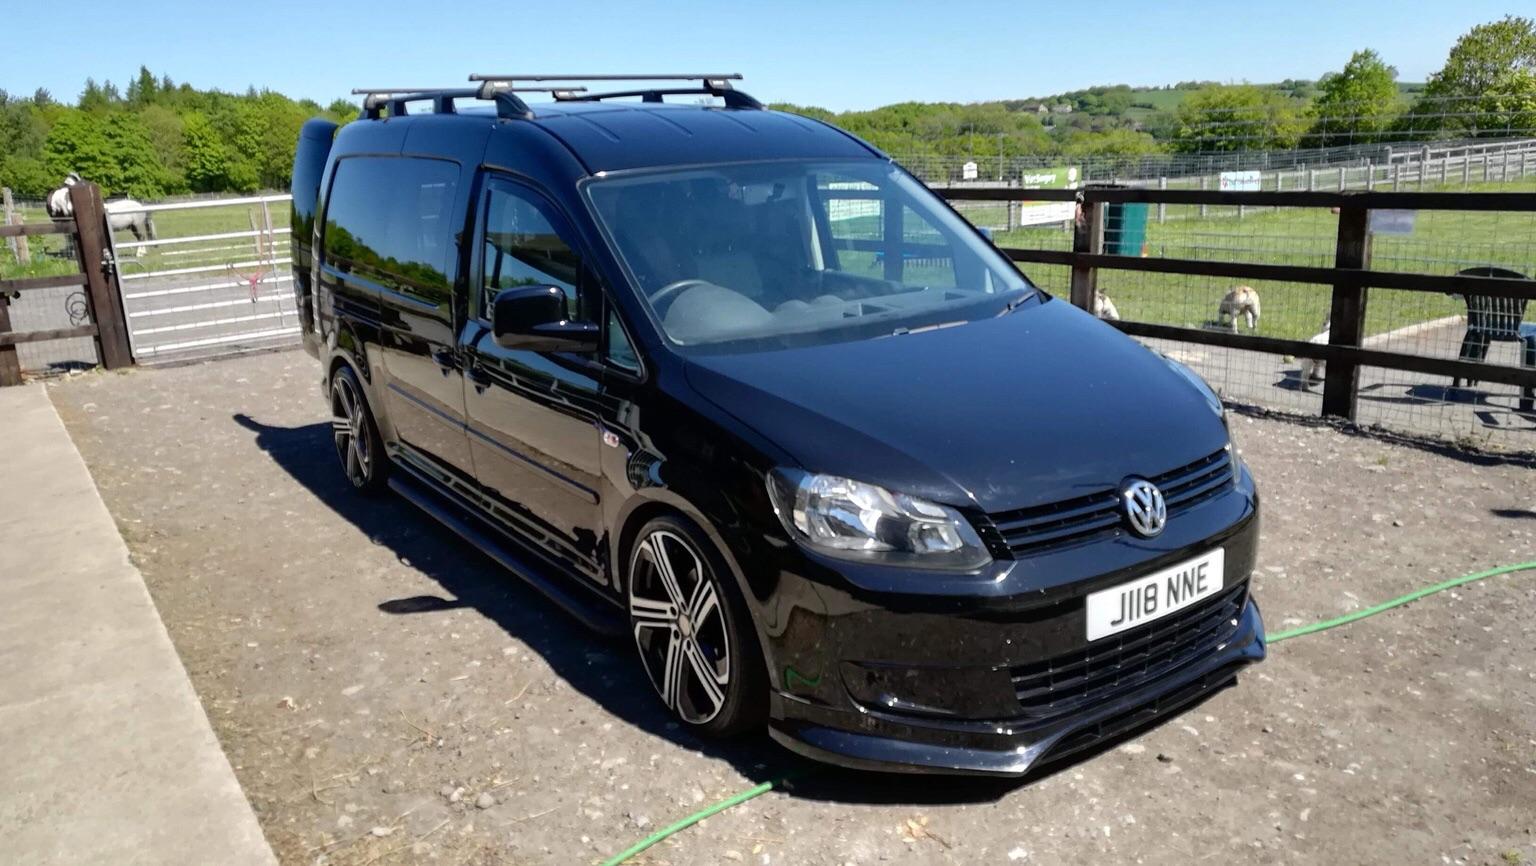 vw caddy crew cab for sale uk